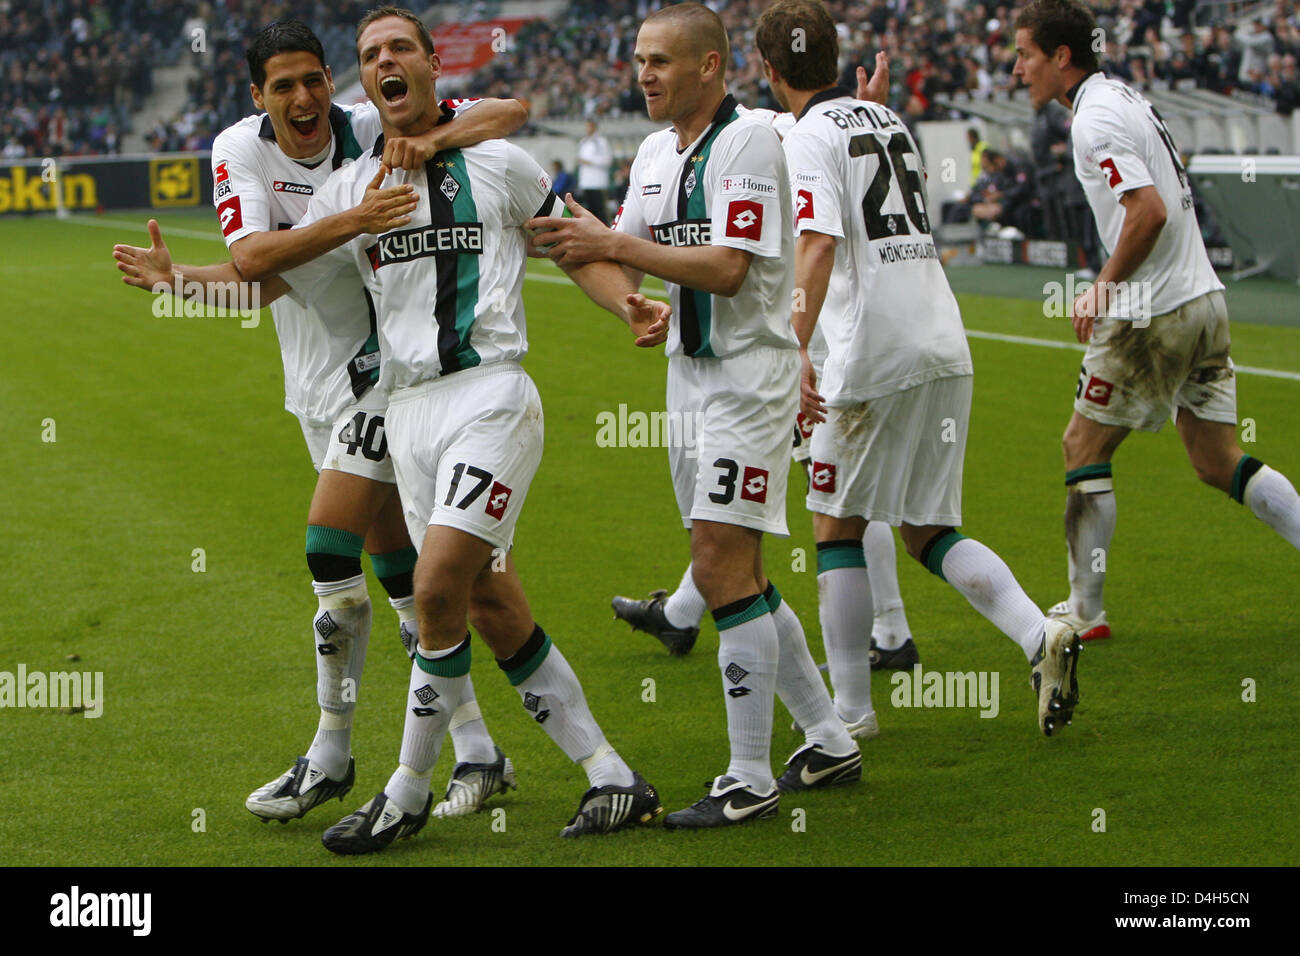 Moenchengladbach's Karim Matmour (L) and Filip Daems (3-L) celebrate with midfielder Patrick Paauwe (2-L) after his 1-0 goal during the Bundesliga soccer match Borussia Moenchengladbach vs SC Karlsruhe at 'Borussia-Park' in Moenchengladbach, Germany, 25 October 2008. Moenchengladbach won the match by 1-0. Photo: David Ebener Stock Photo